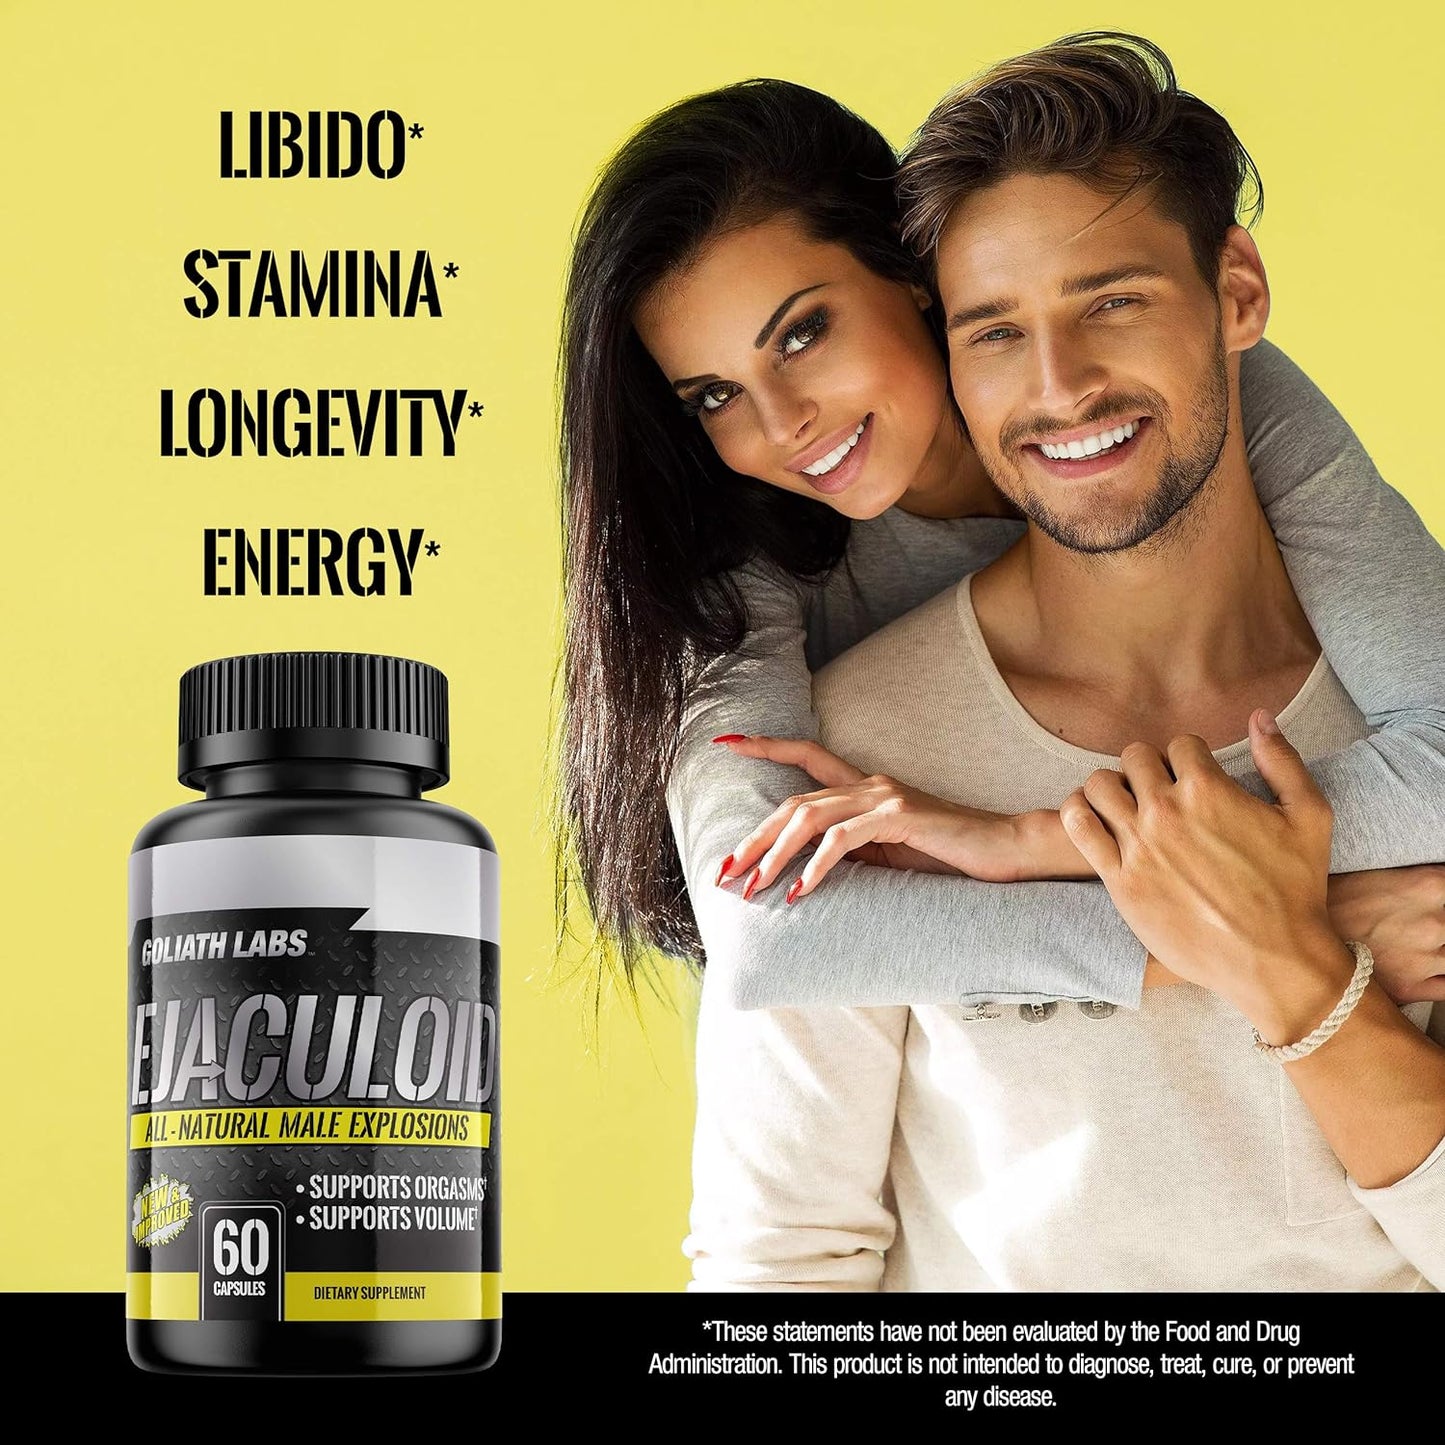 Ejaculoid Enhancing Pills (60 Capsules) - Enlargement Booster for Men - Increase Size, Strength, Stamina - Energy, Mood, Endurance Boost - All Natural Performance Supplement - Made in USA